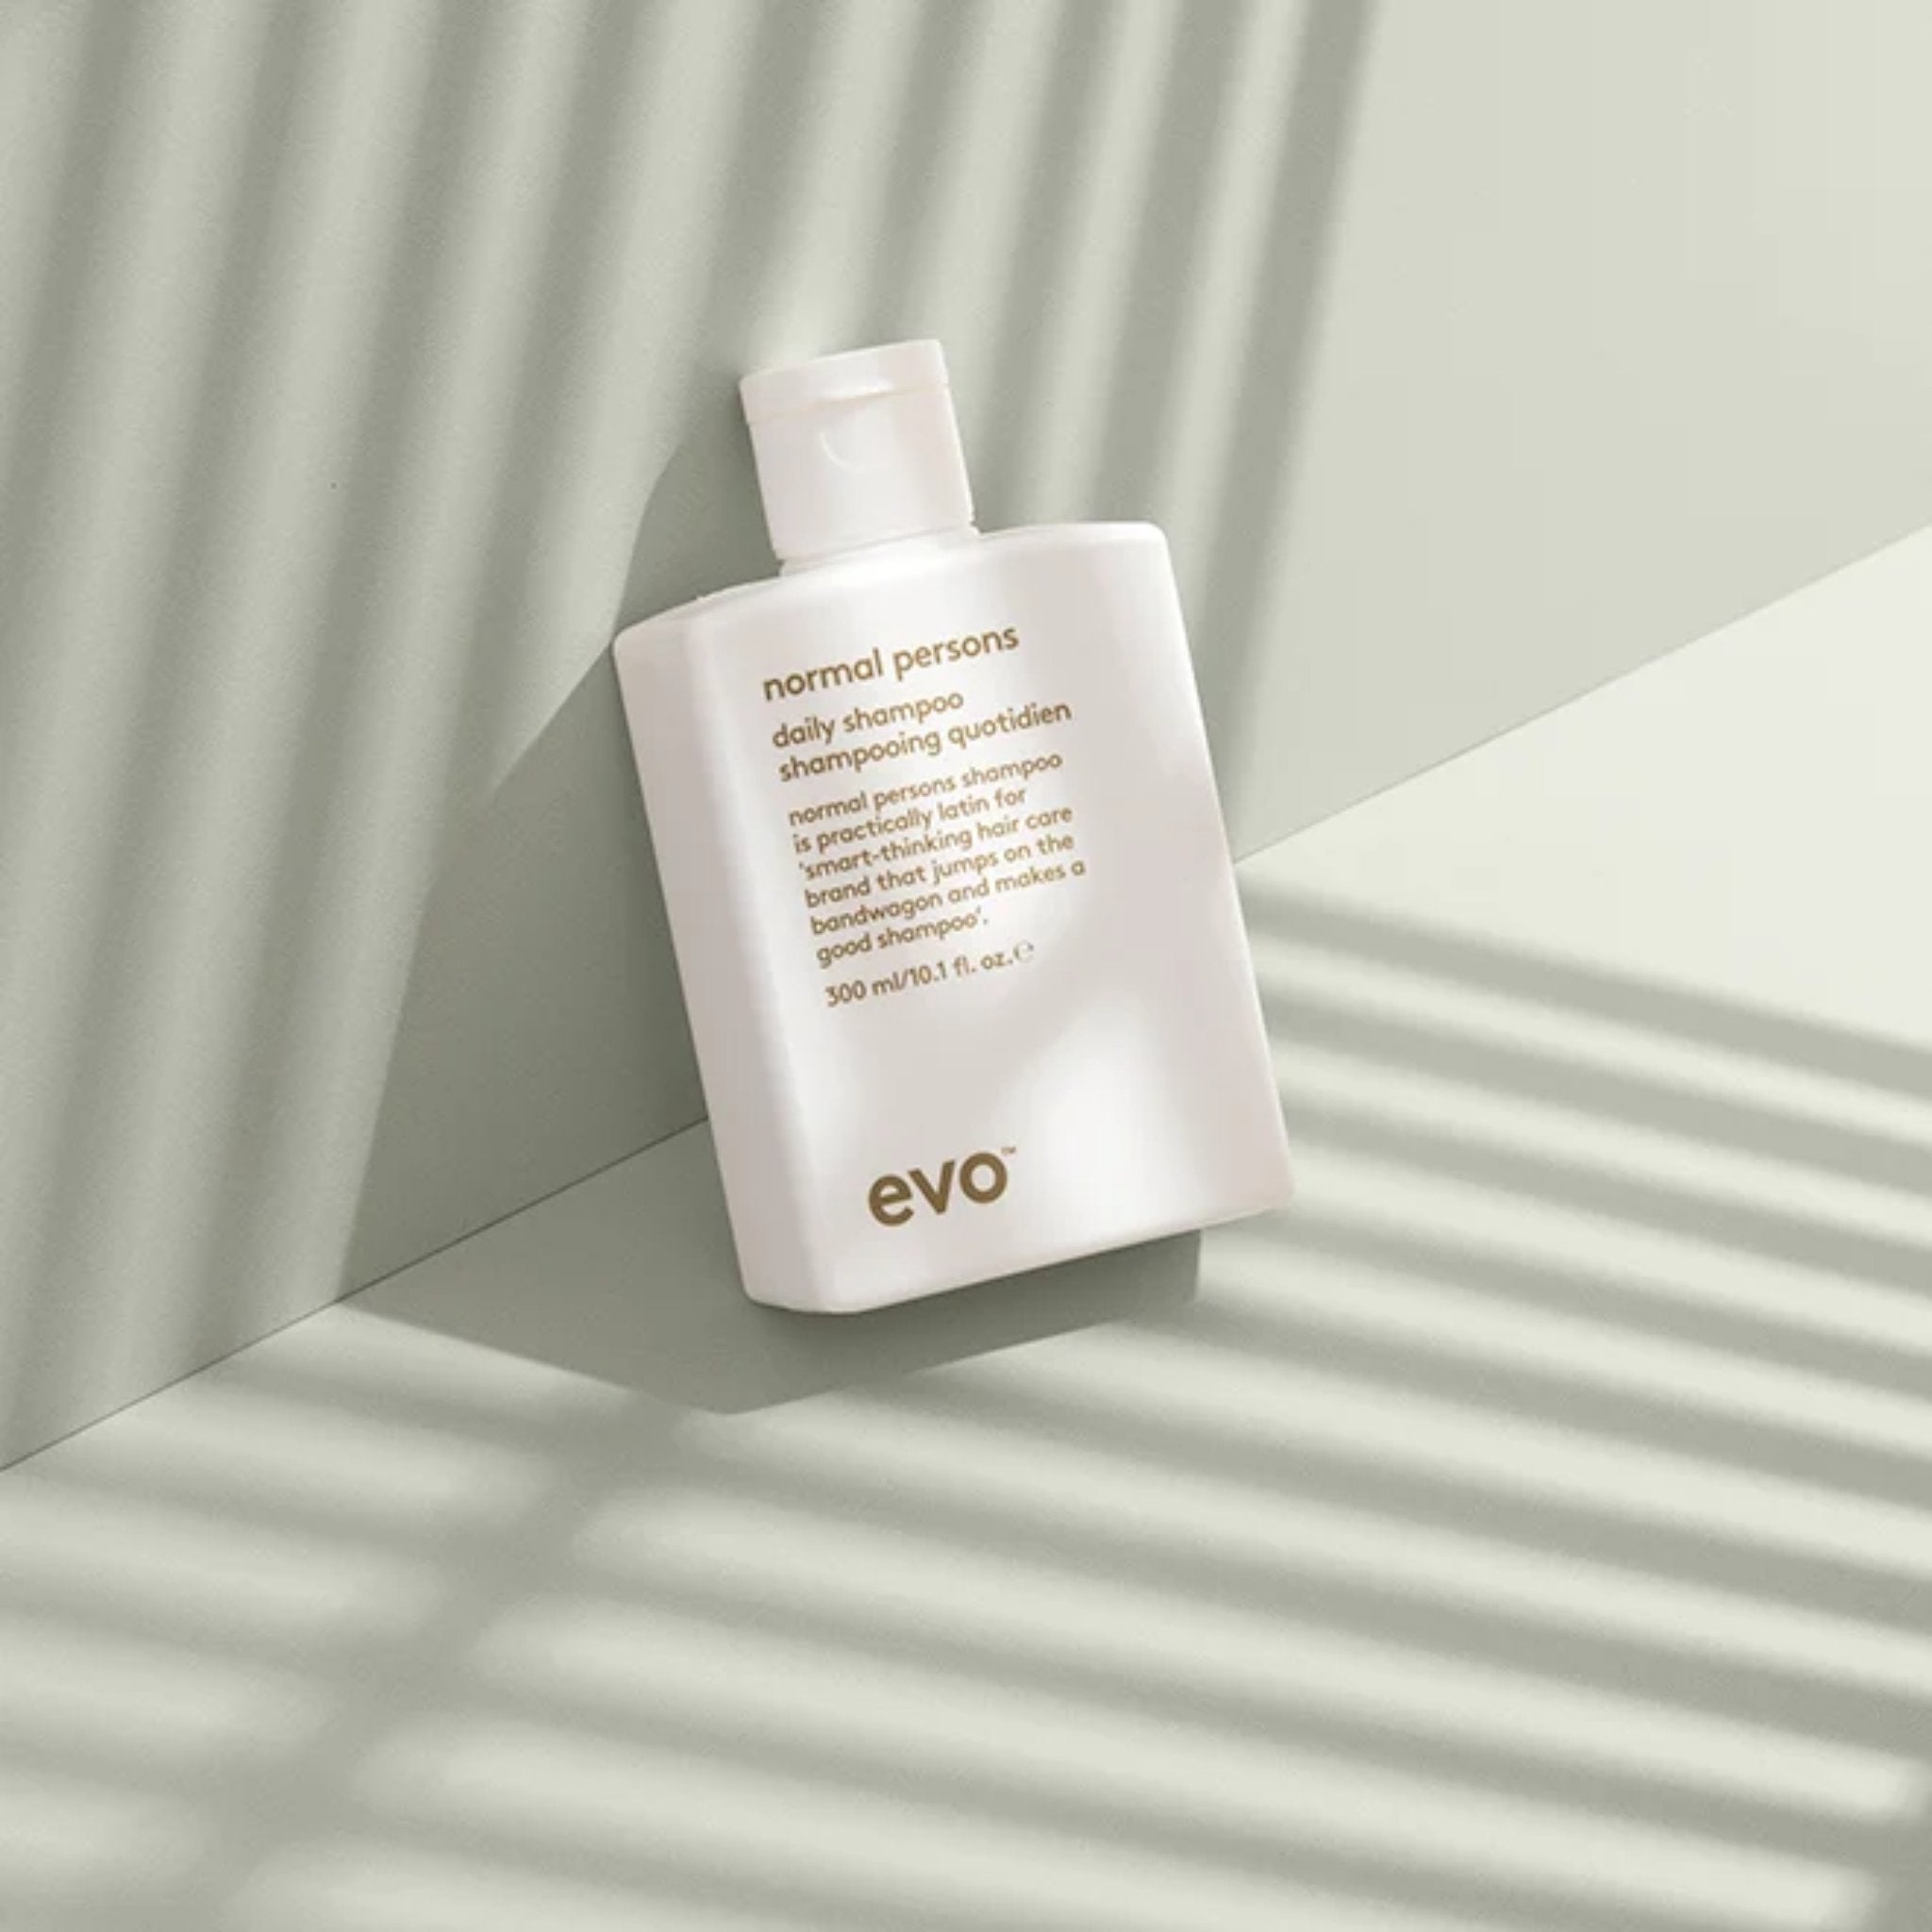 Evo. Normal Persons Shampoing Quotidien - 300 ml - Concept C. Shop